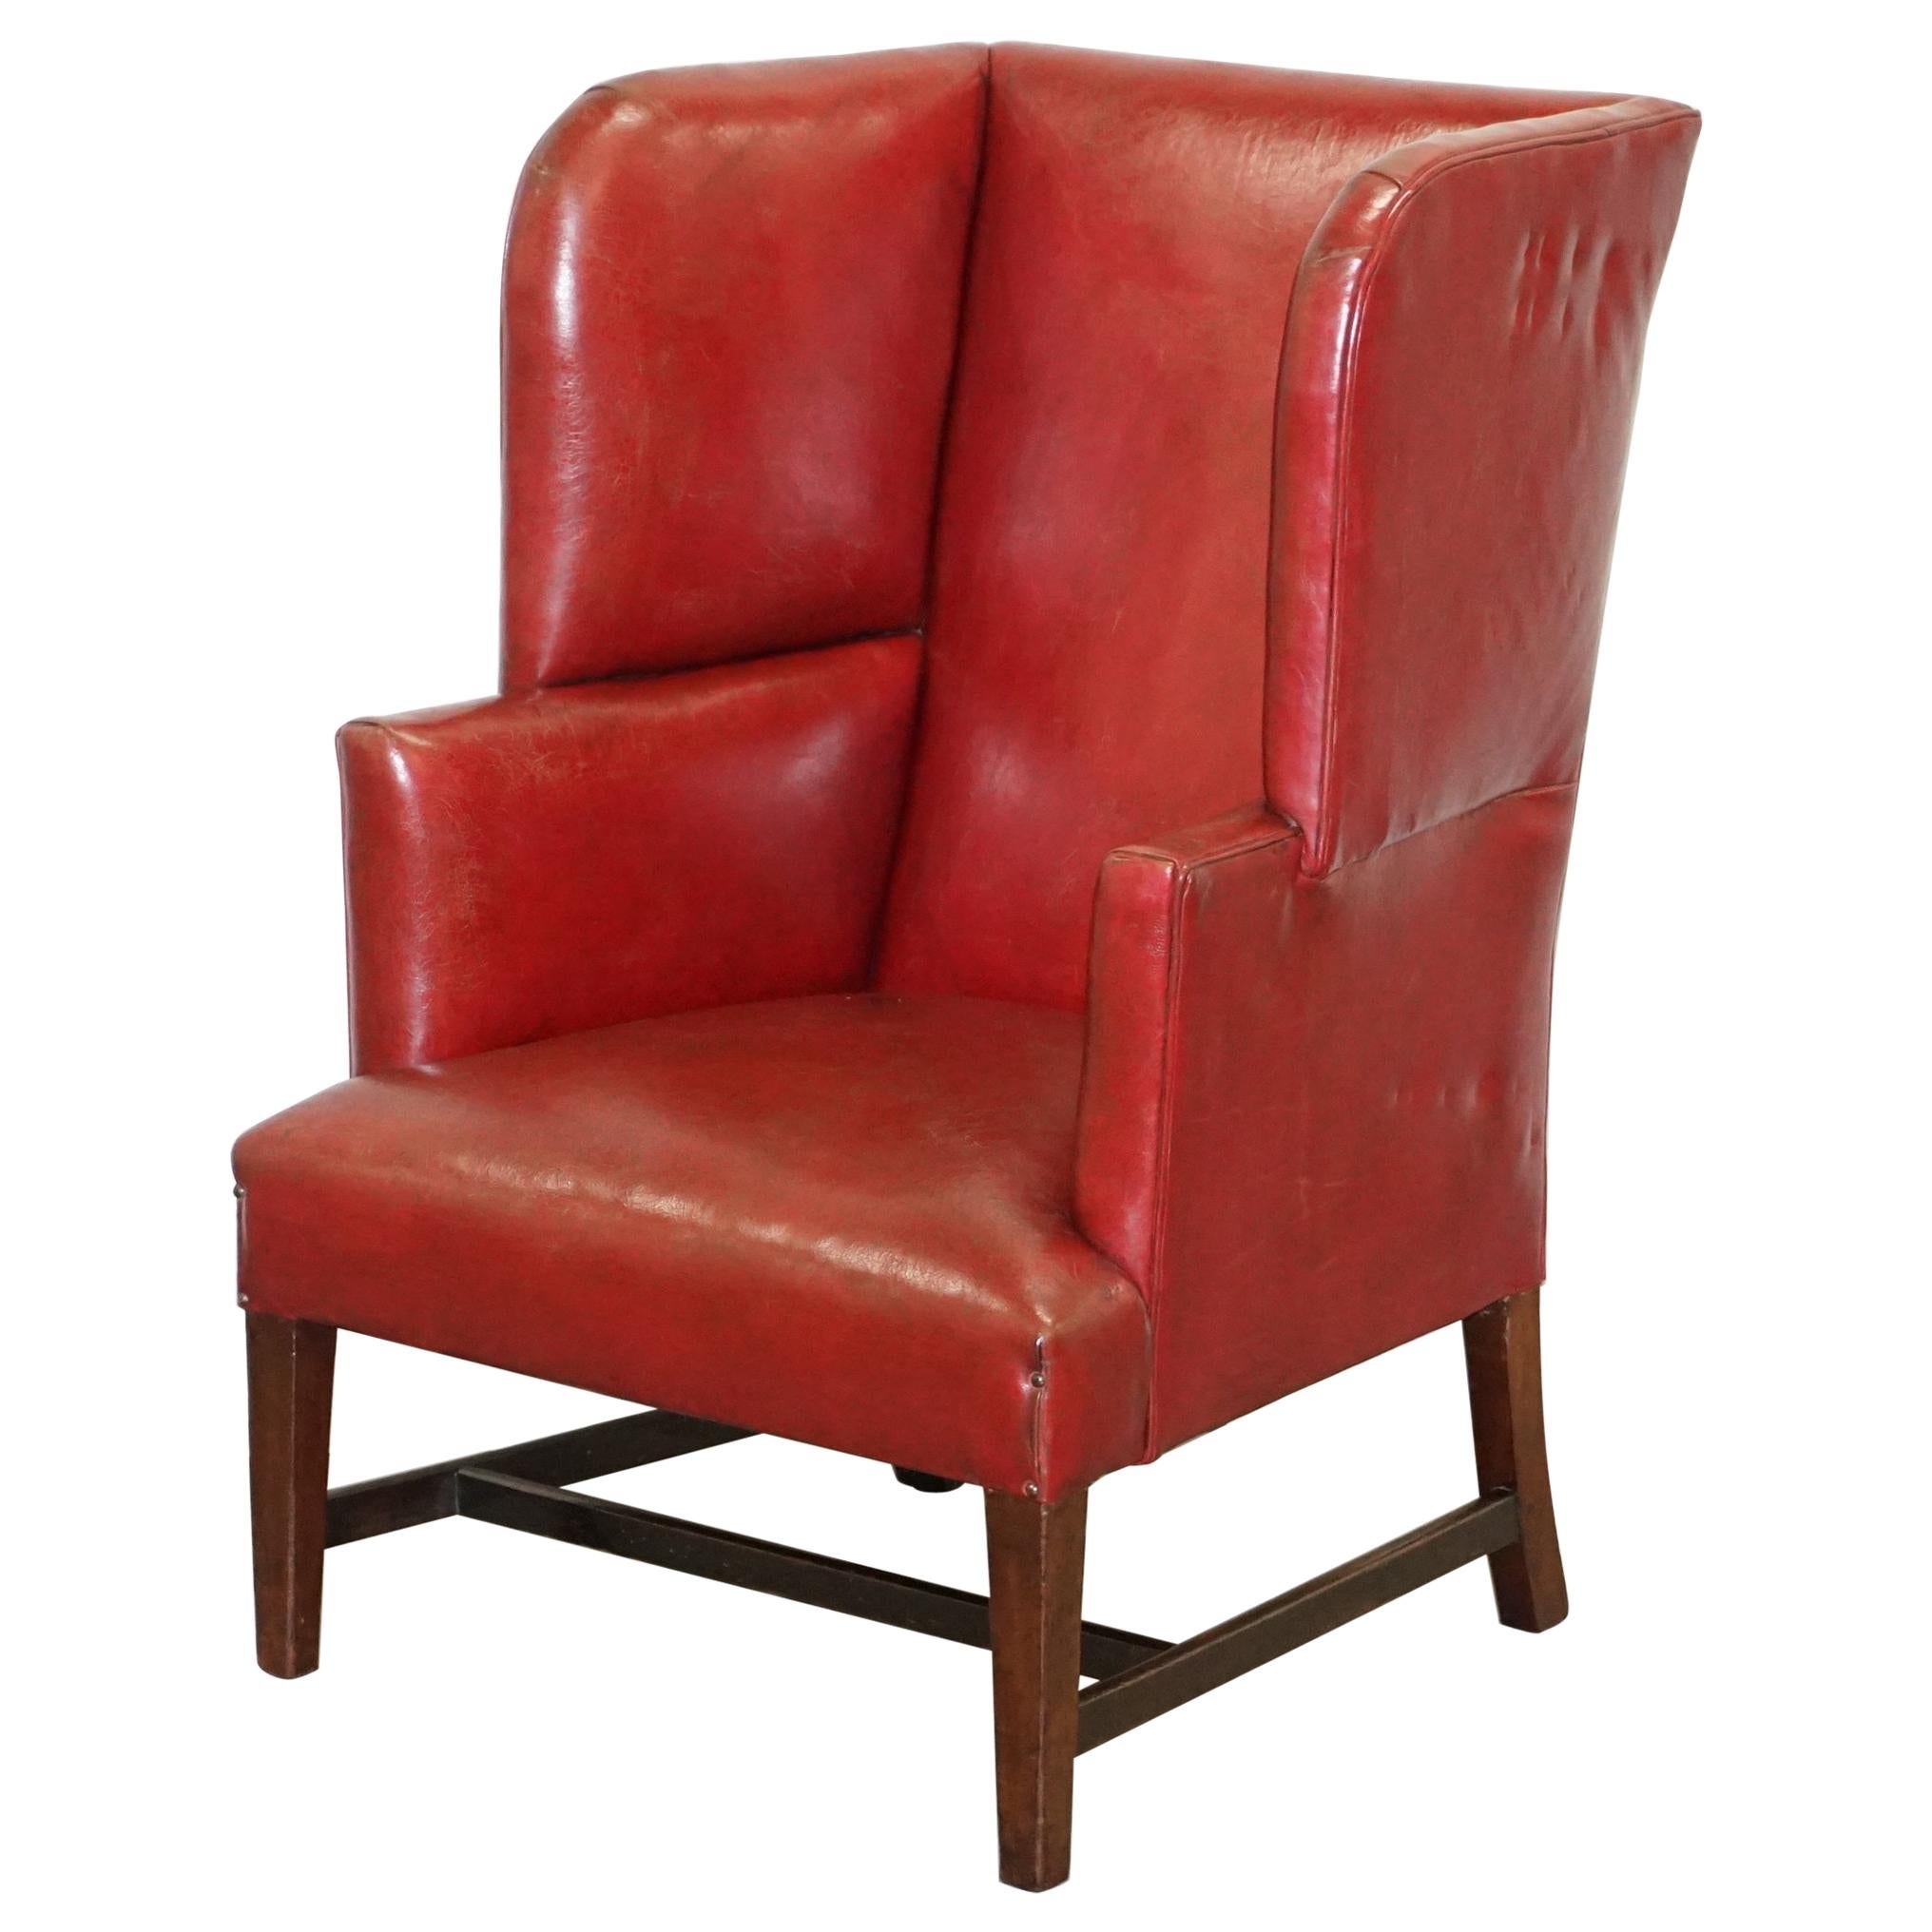 Sublime Early Georgian circa 1780 Porters Wingback Armchair Postbox Red Leather For Sale